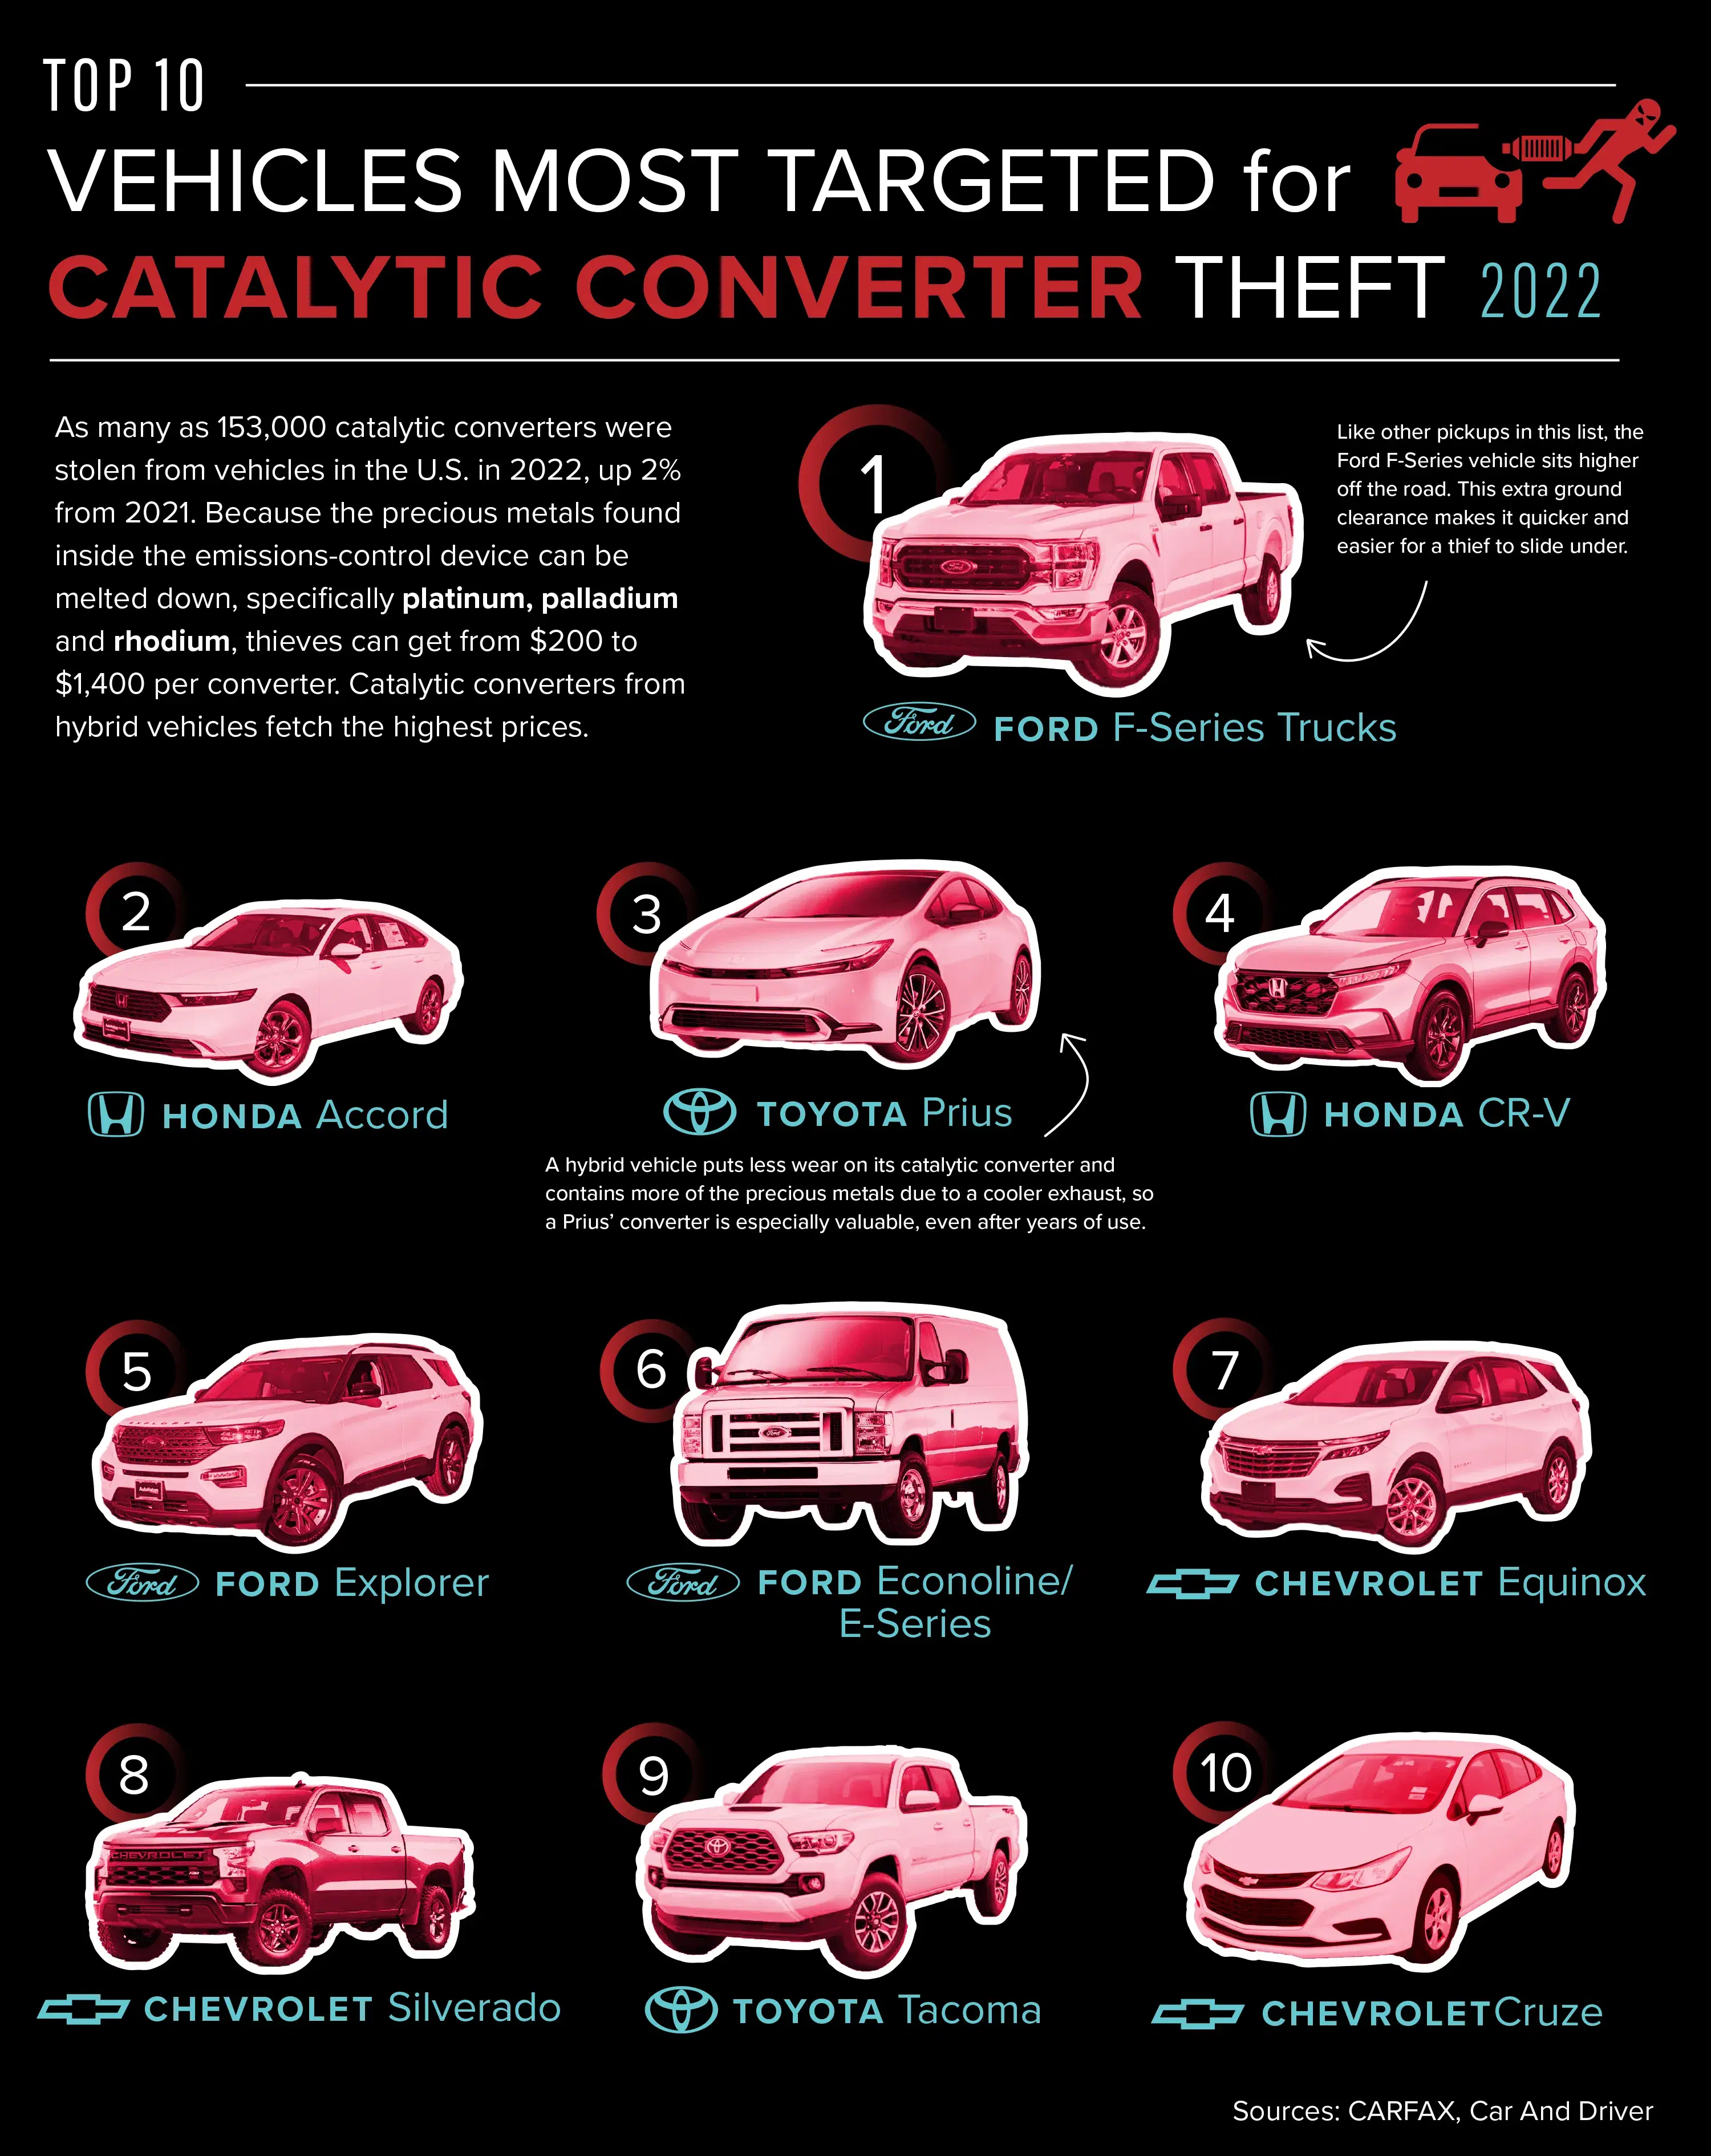 Vehicles Most Targeted for Catalytic Converter Theft